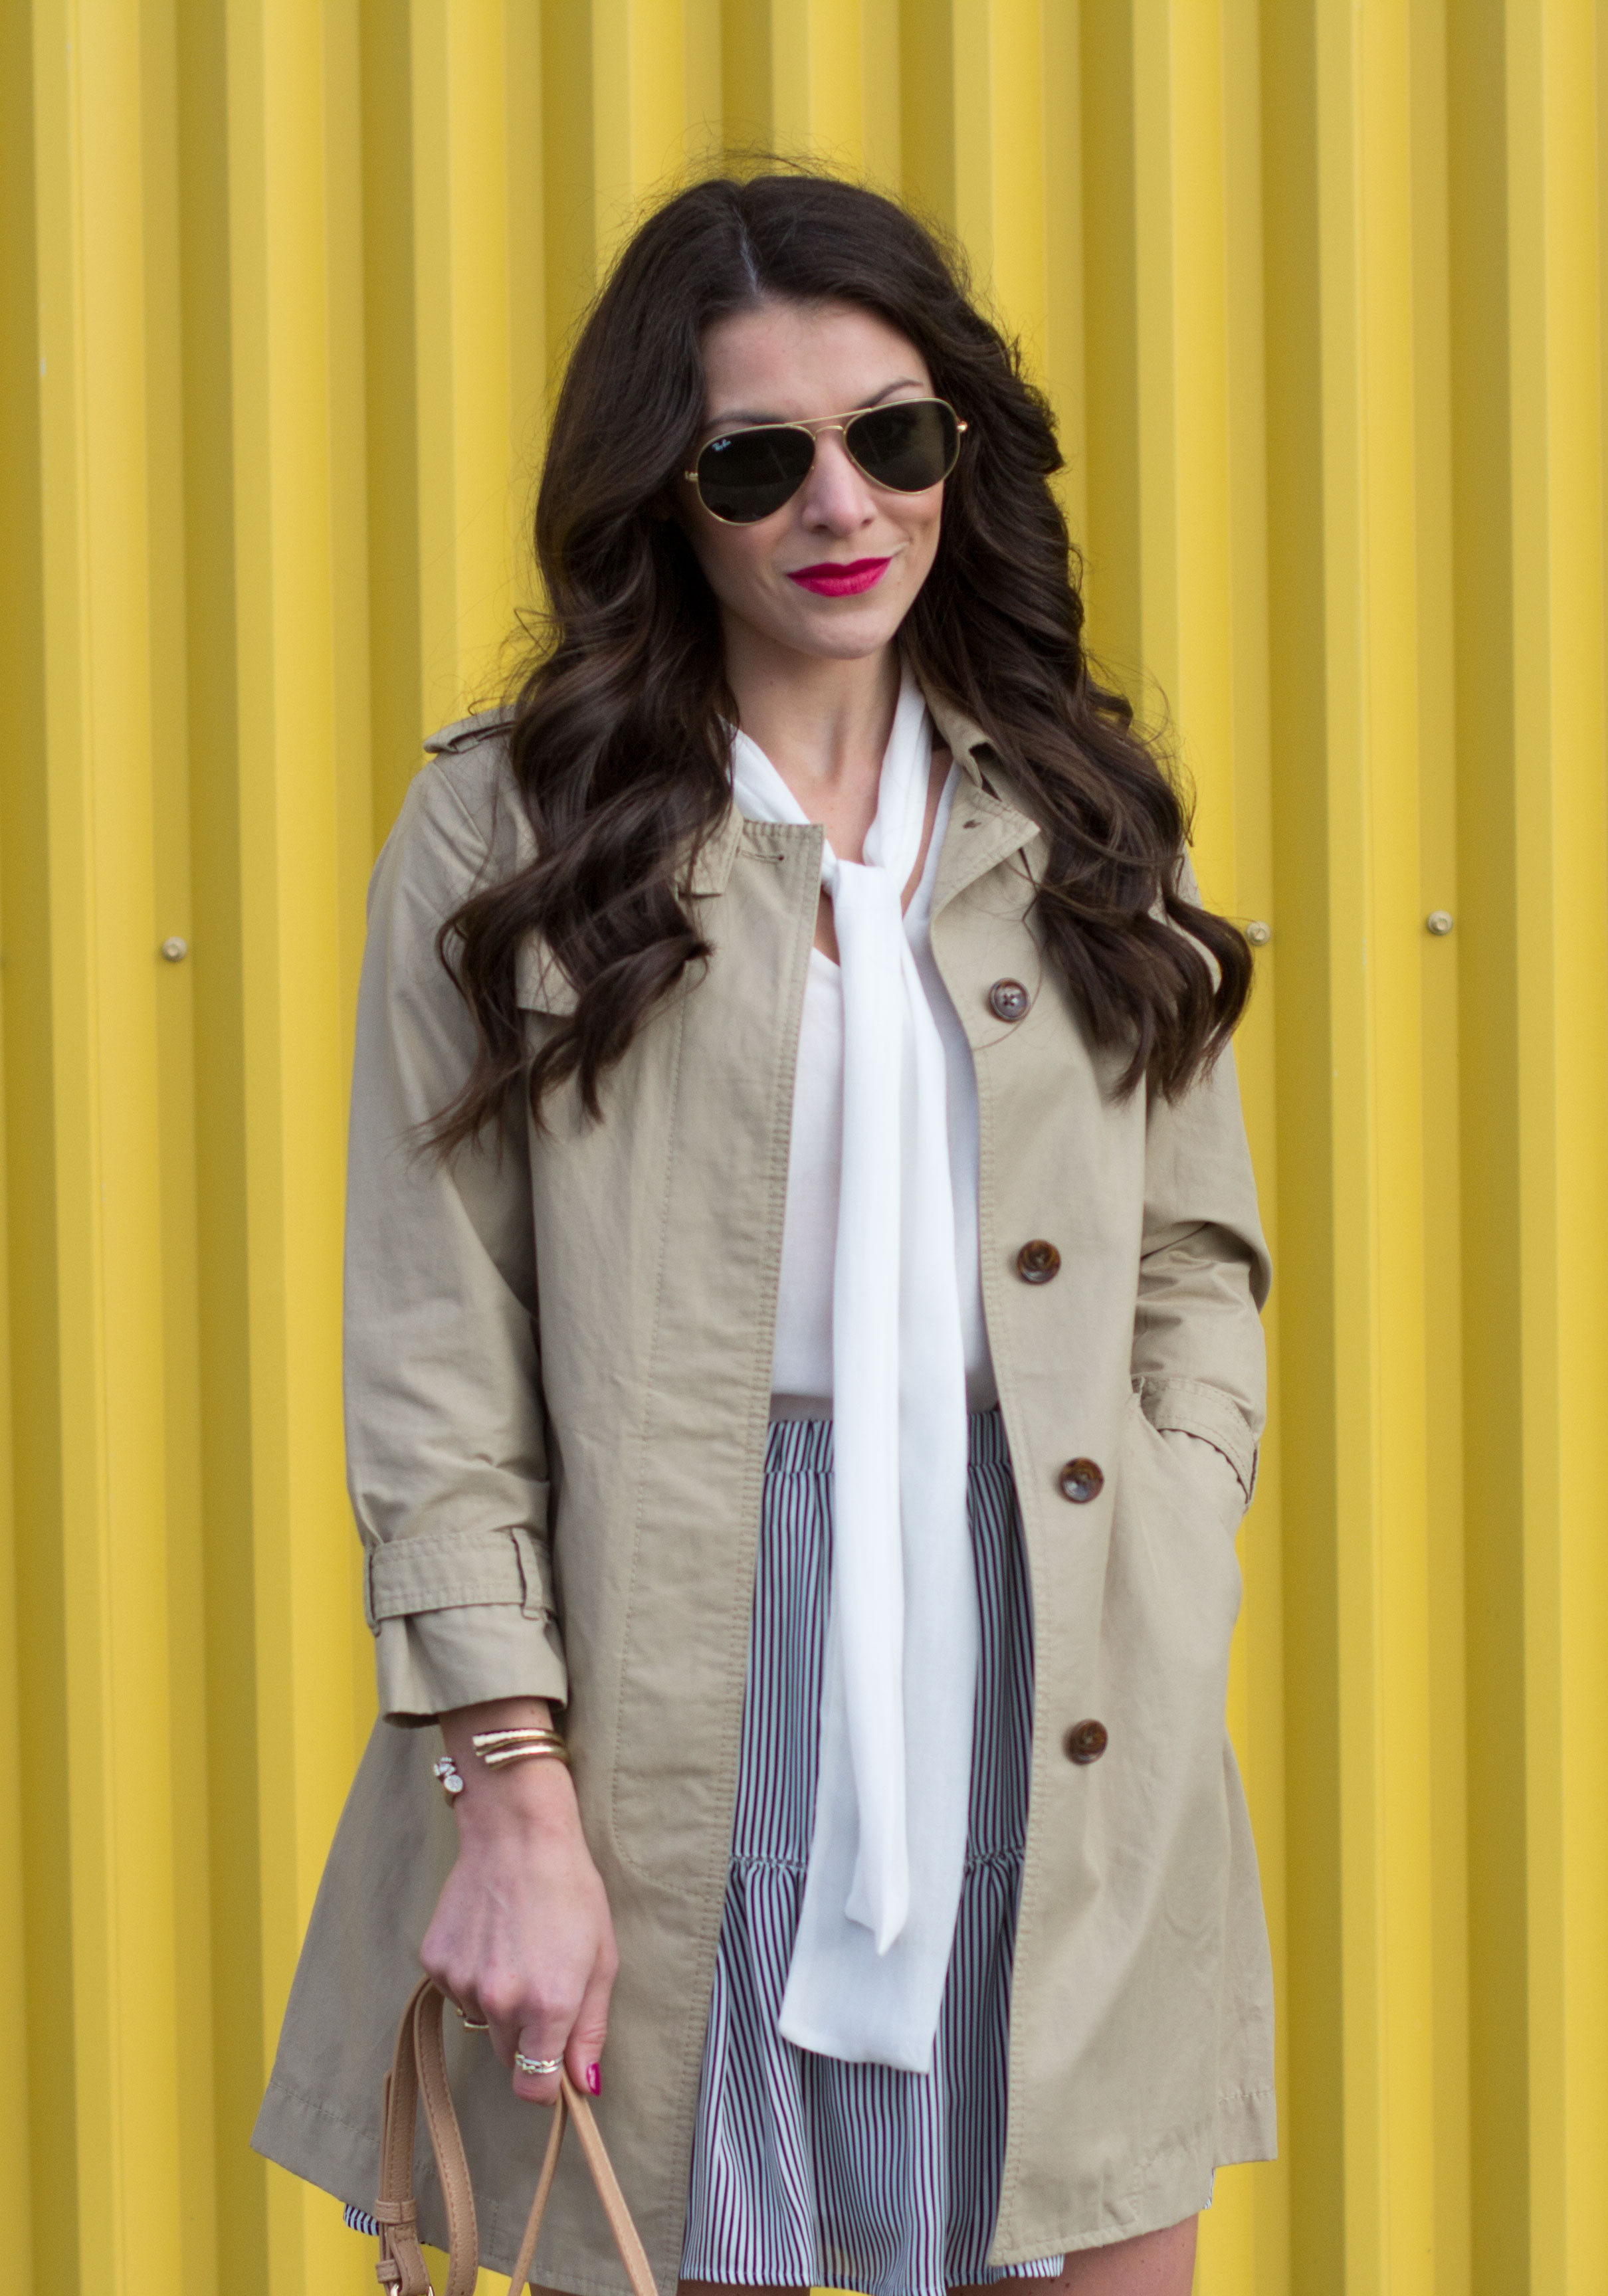 Transition You Wardrobe Into Spring, Steve Madden Gorgeous Boots, Banana Republic Embroidered Trim Mini Skirt, White Bow Blouse, Classic Trench Coat, Rebecca Minkoff Tassel Bag DIY